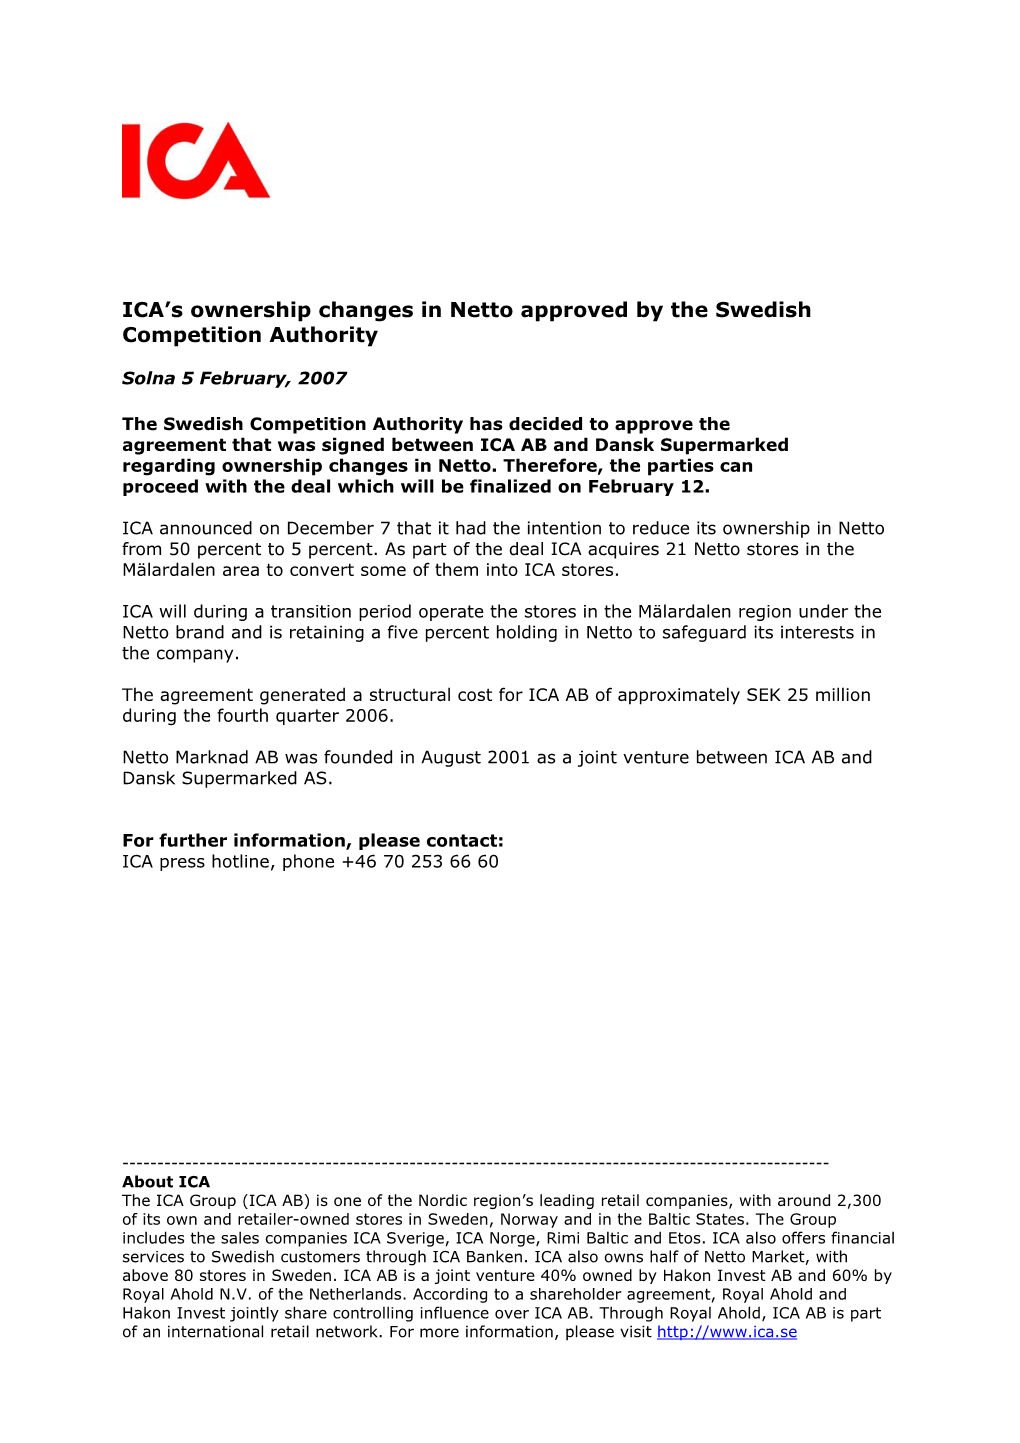 ICA's Ownership Changes in Netto Approved by The